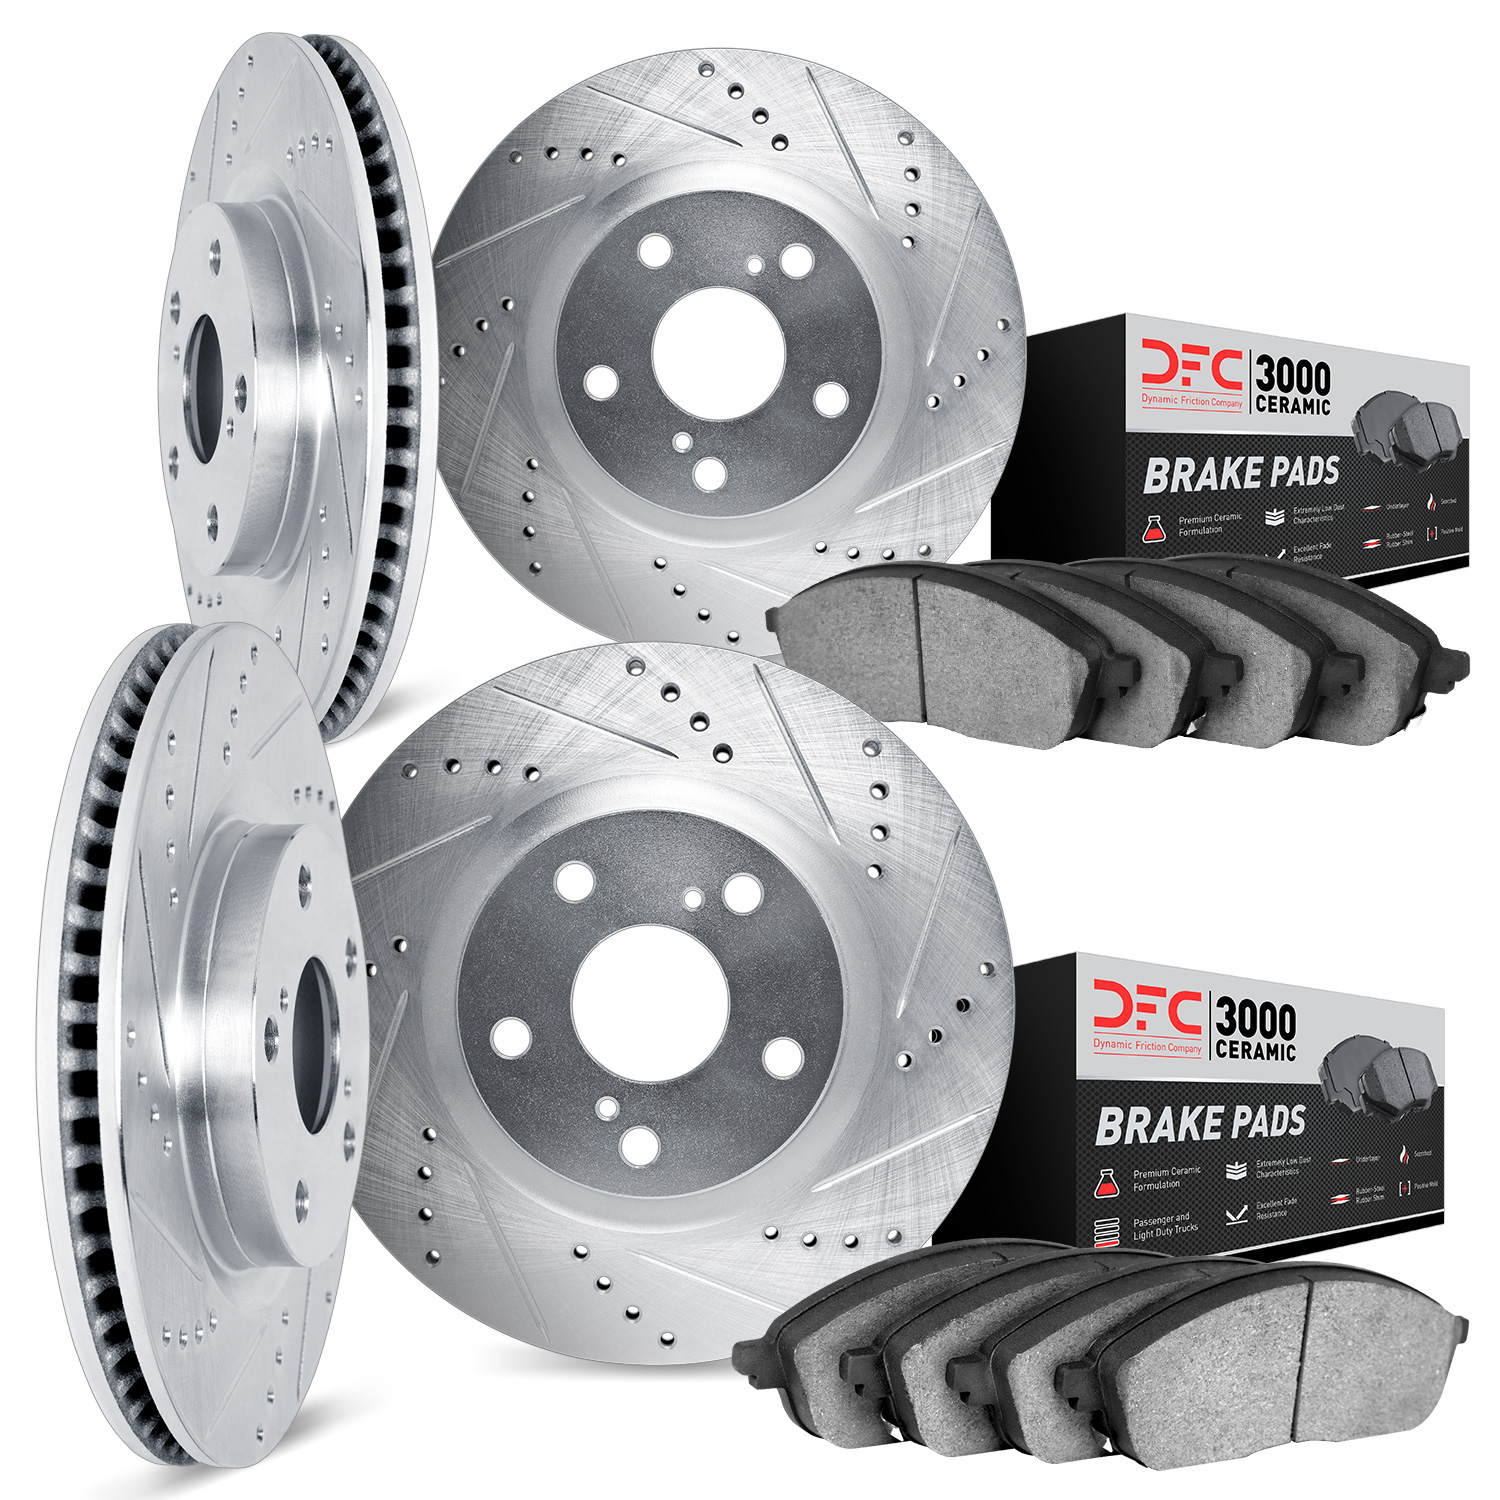 7304-54096 Drilled/Slotted Brake Rotor with 3000-Series Ceramic Brake Pads Kit [Silver], 2013-2019 Ford/Lincoln/Mercury/Mazda, P